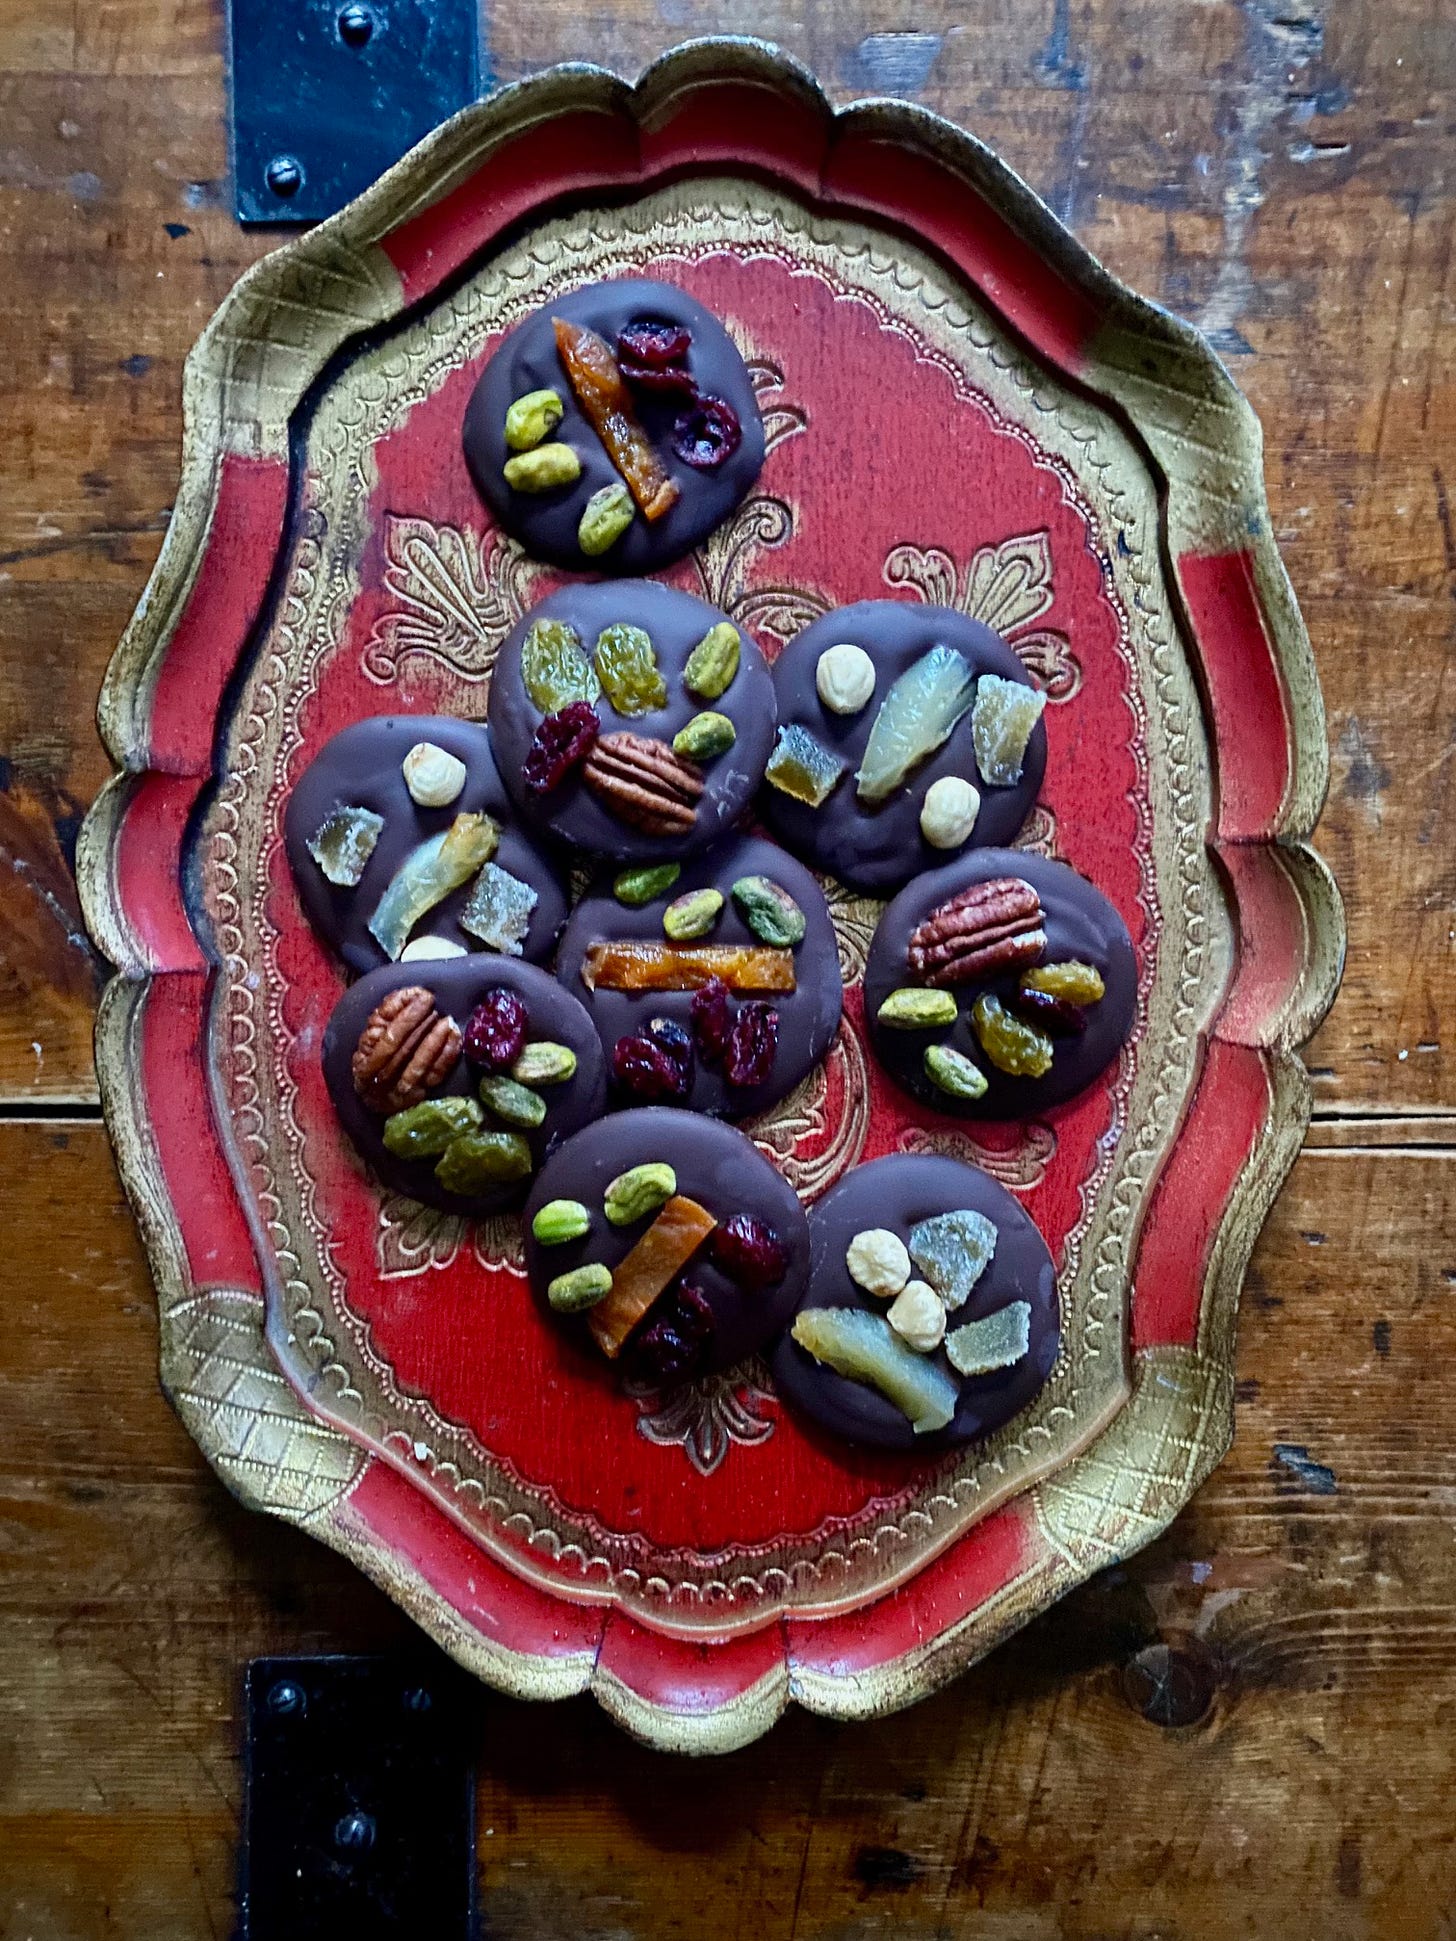 Chocolate discs topped with dried fruit and nuts